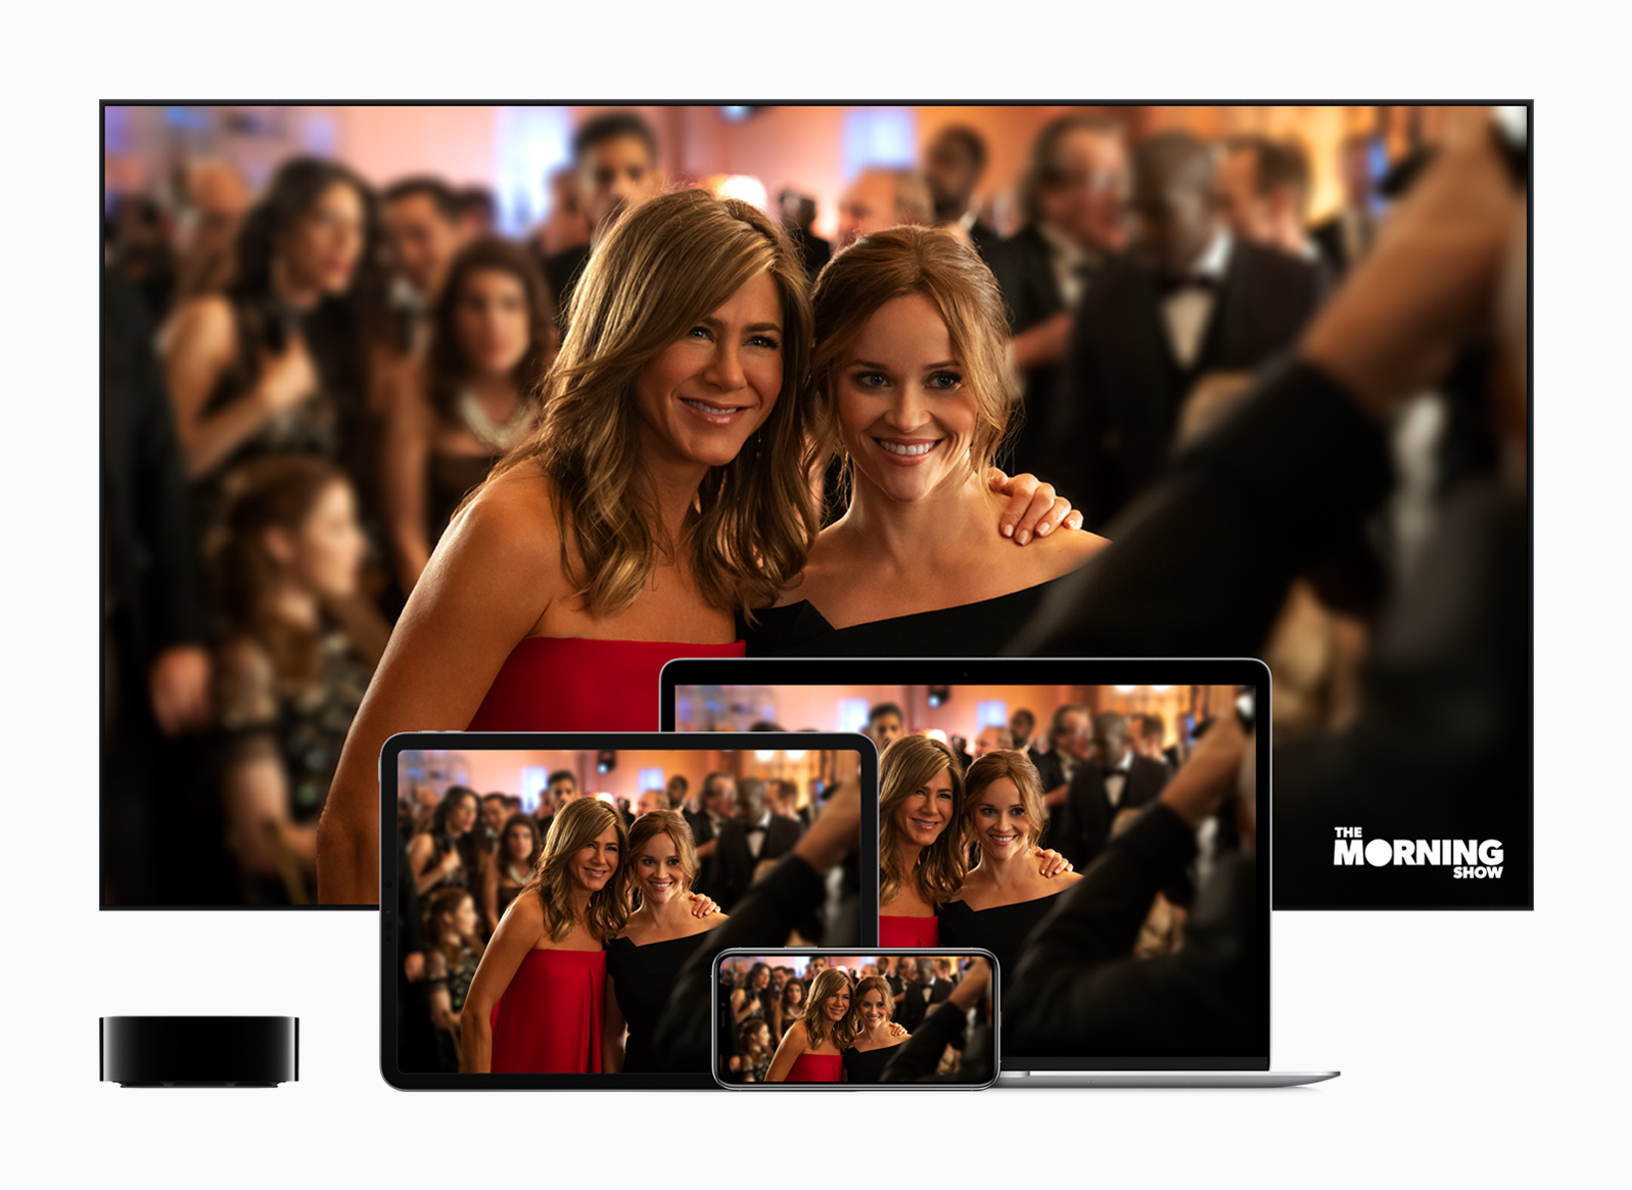 Apple TV+ launches November 1, featuring originals from the world’s